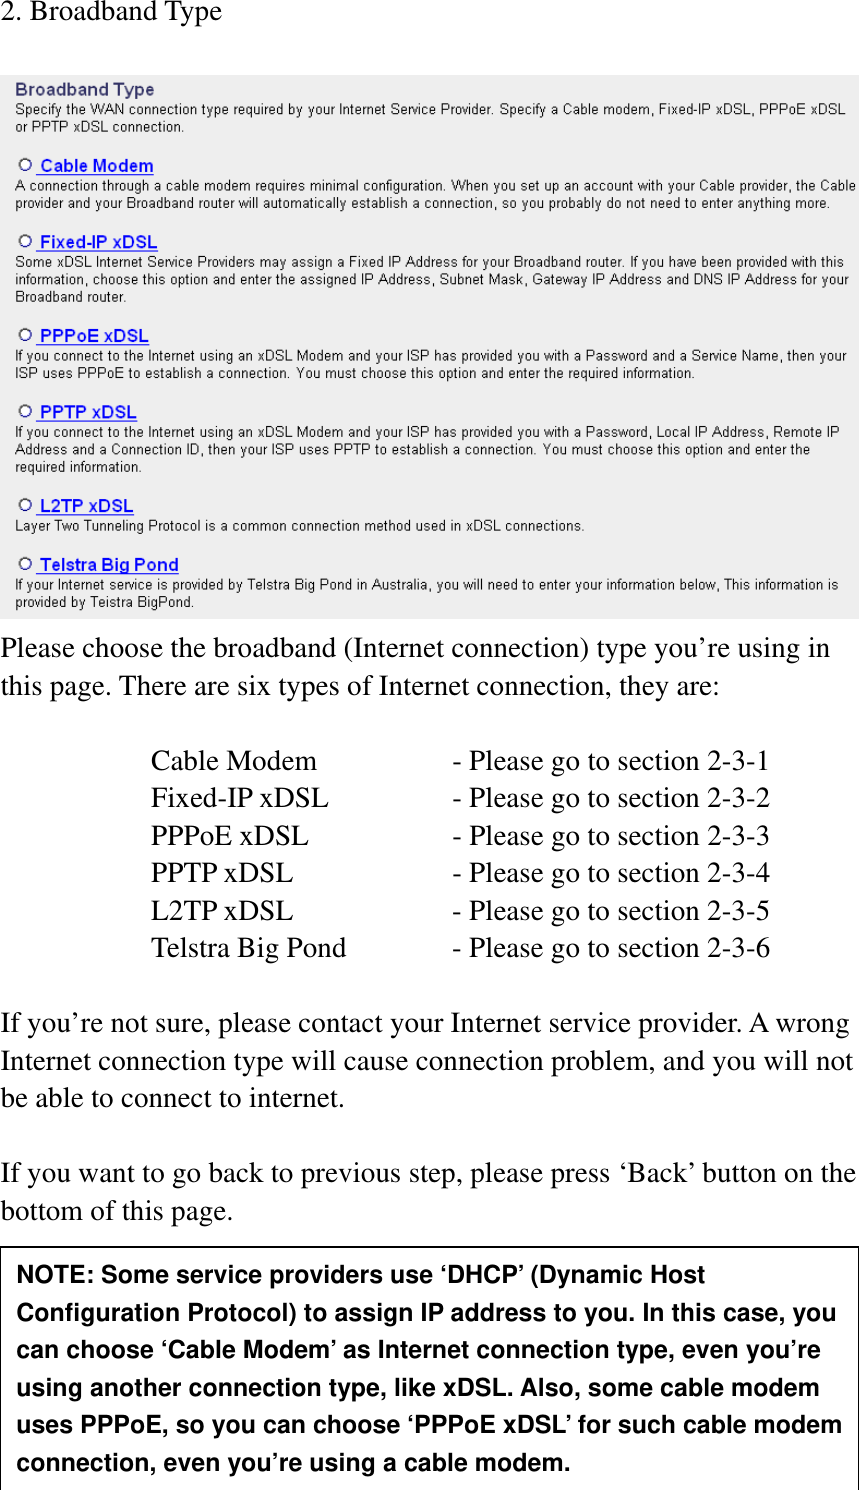 23 2. Broadband Type   Please choose the broadband (Internet connection) type you’re using in this page. There are six types of Internet connection, they are:  Cable Modem      - Please go to section 2-3-1 Fixed-IP xDSL      - Please go to section 2-3-2 PPPoE xDSL      - Please go to section 2-3-3 PPTP xDSL       - Please go to section 2-3-4 L2TP xDSL       - Please go to section 2-3-5 Telstra Big Pond     - Please go to section 2-3-6  If you’re not sure, please contact your Internet service provider. A wrong Internet connection type will cause connection problem, and you will not be able to connect to internet.  If you want to go back to previous step, please press ‘Back’ button on the bottom of this page.      NOTE: Some service providers use ‘DHCP’ (Dynamic Host Configuration Protocol) to assign IP address to you. In this case, you can choose ‘Cable Modem’ as Internet connection type, even you’re using another connection type, like xDSL. Also, some cable modem uses PPPoE, so you can choose ‘PPPoE xDSL’ for such cable modem connection, even you’re using a cable modem. 